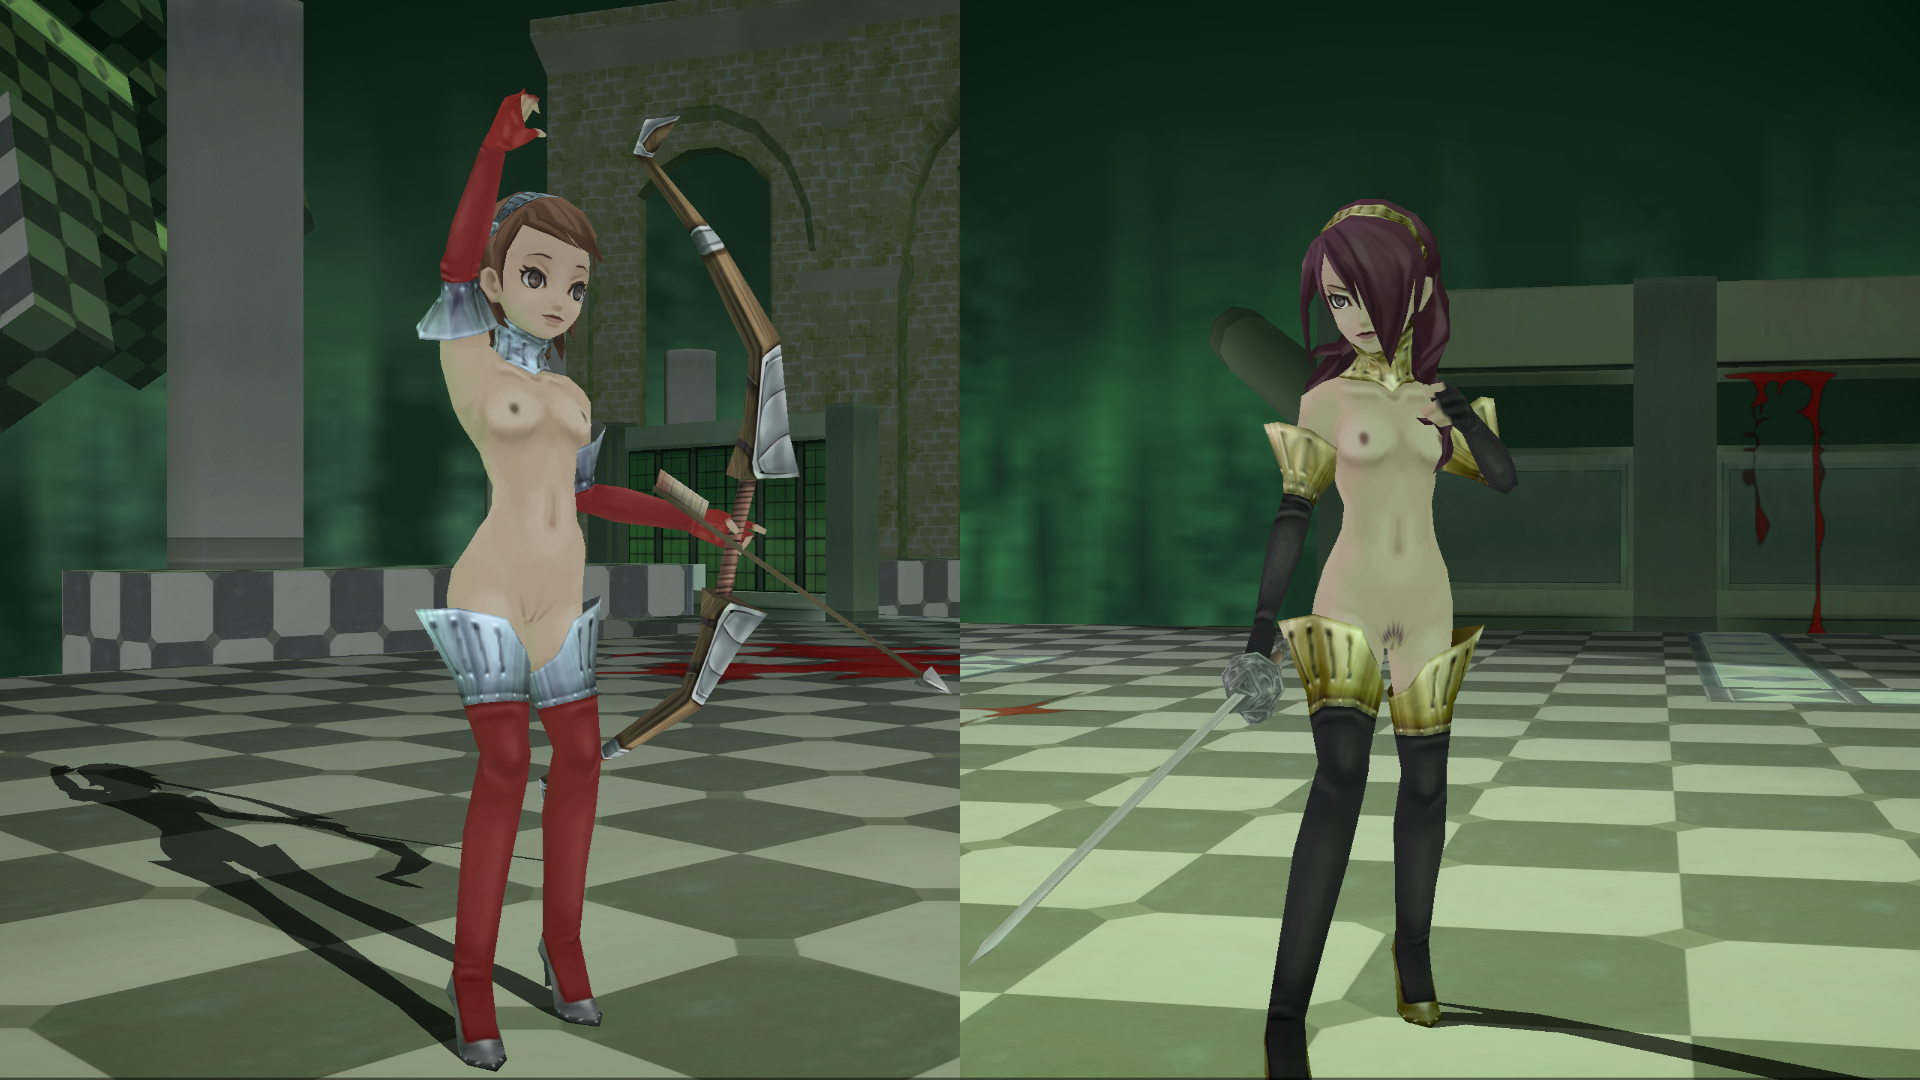 Persona 3 FES - Exposed High-cut Armor